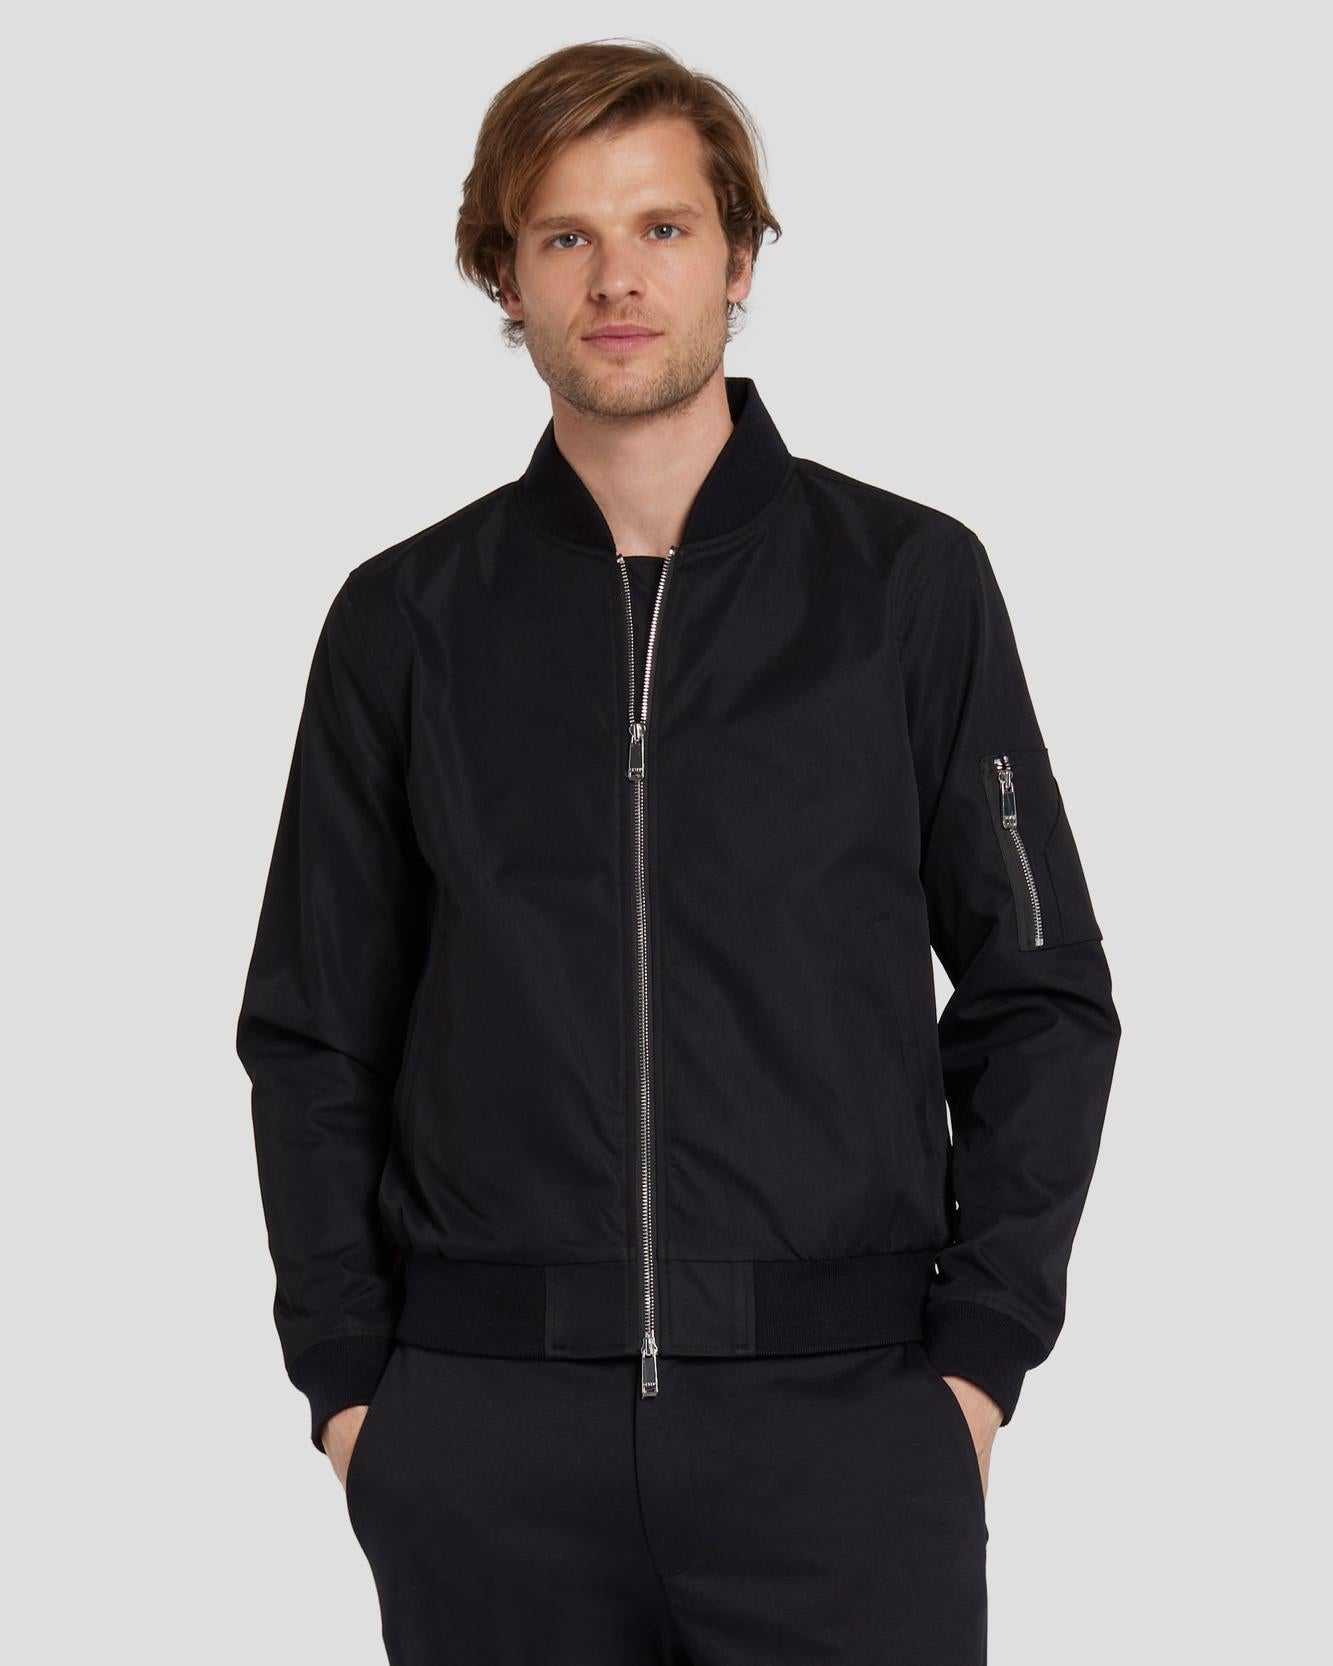 Dynamic Luxe Bomber Jacket in Black | 7 For All Mankind